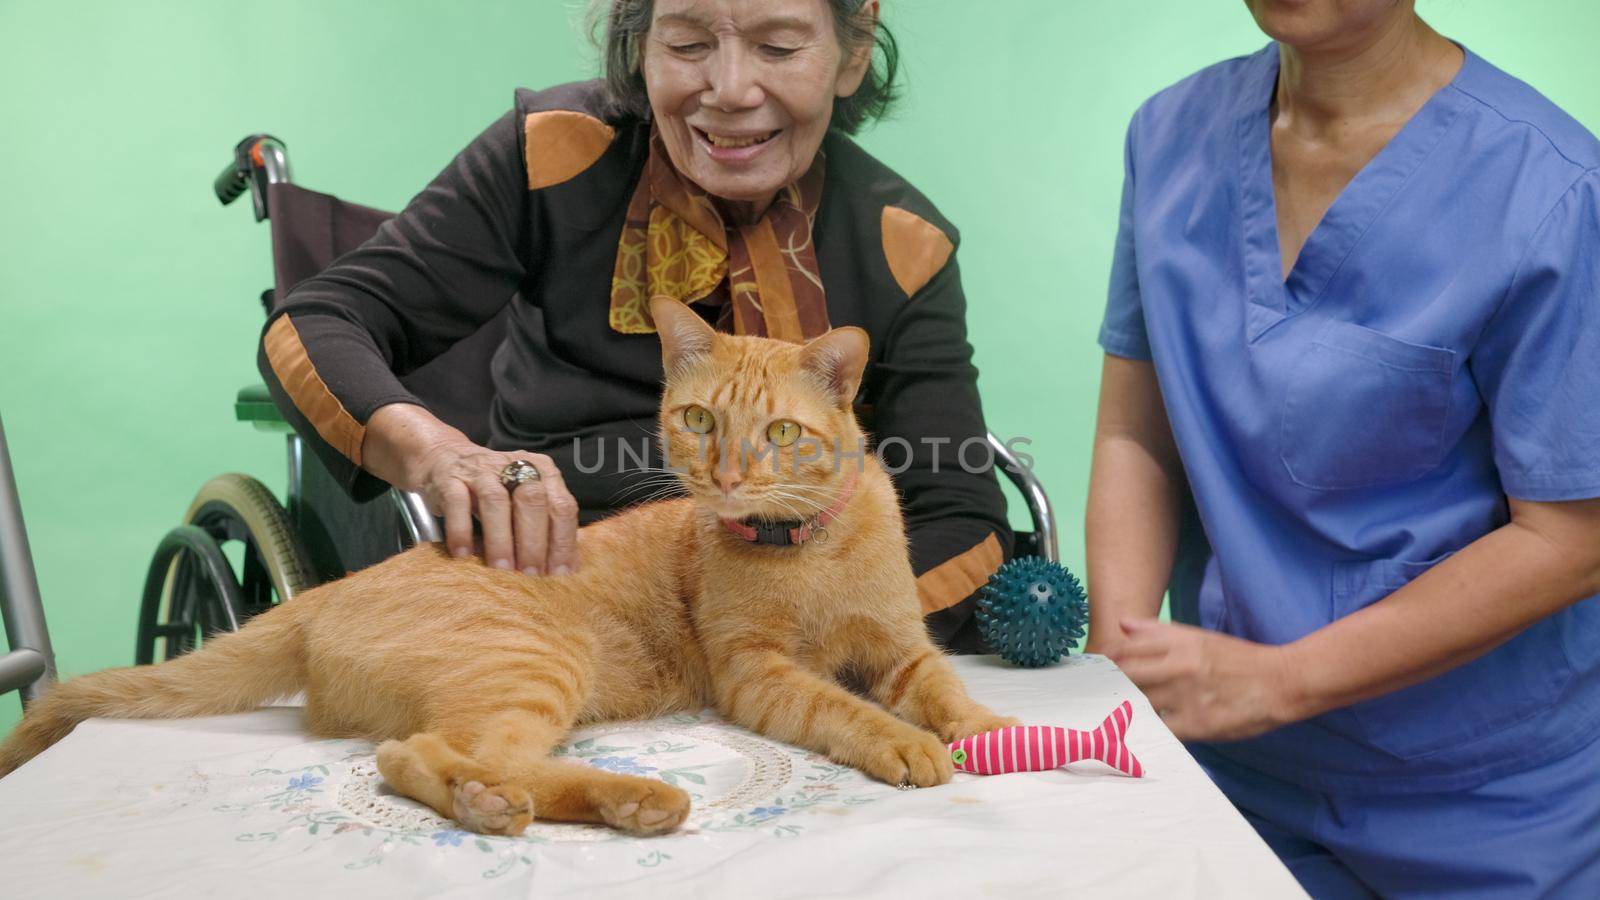 Pets Therapy Helps Dementia Elderly on Chroma Key Background.